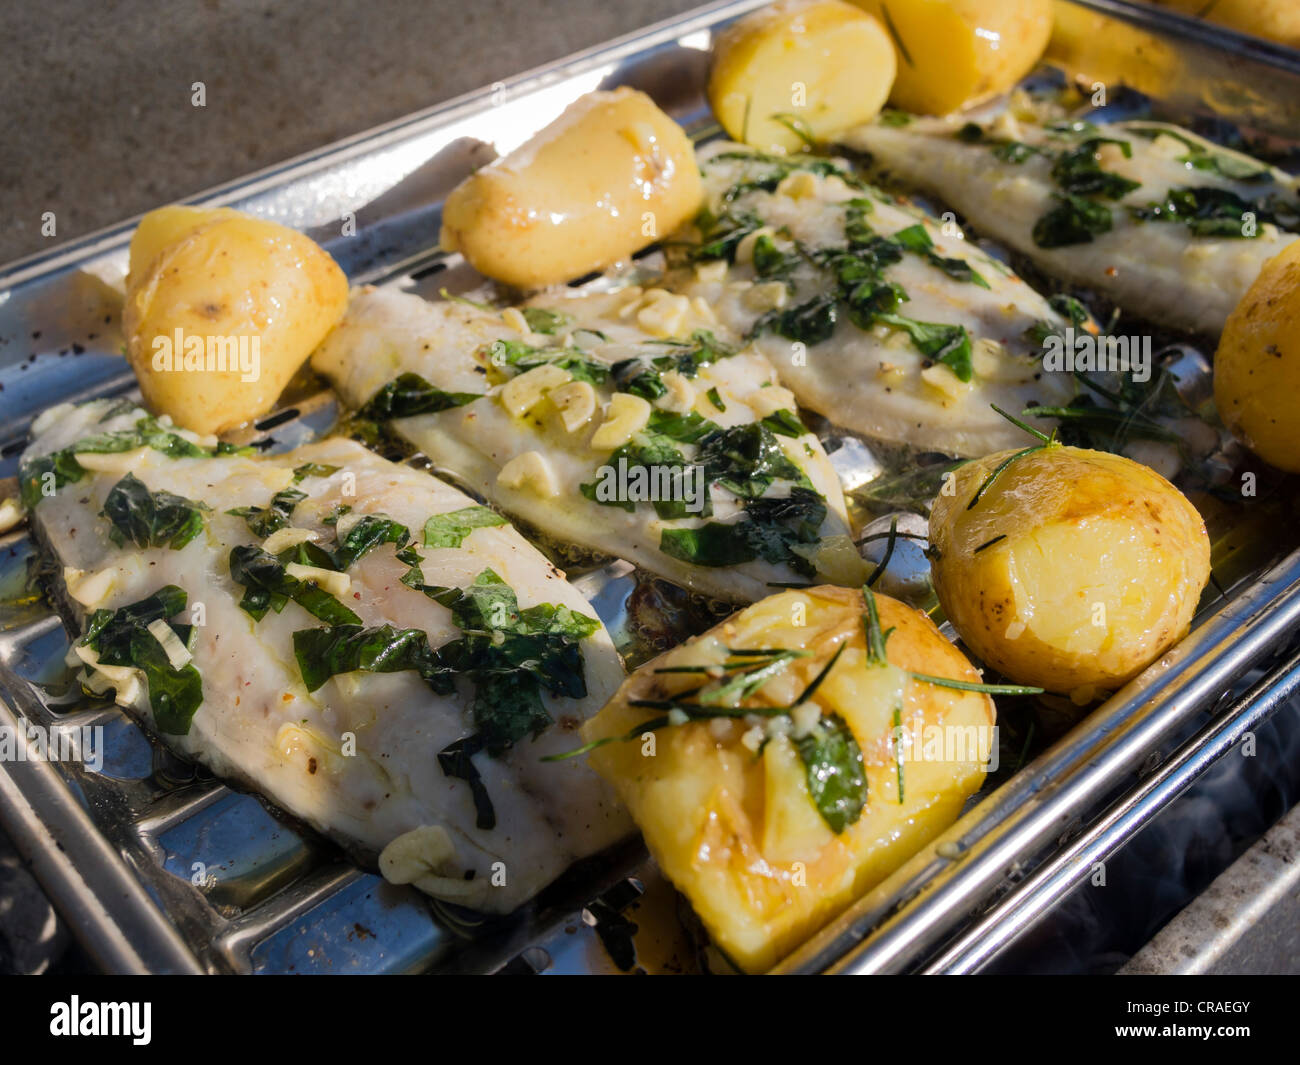 Gilthead seabream filets with basil and garlic are being grilled in a grill pan along with potatoes. Stock Photo